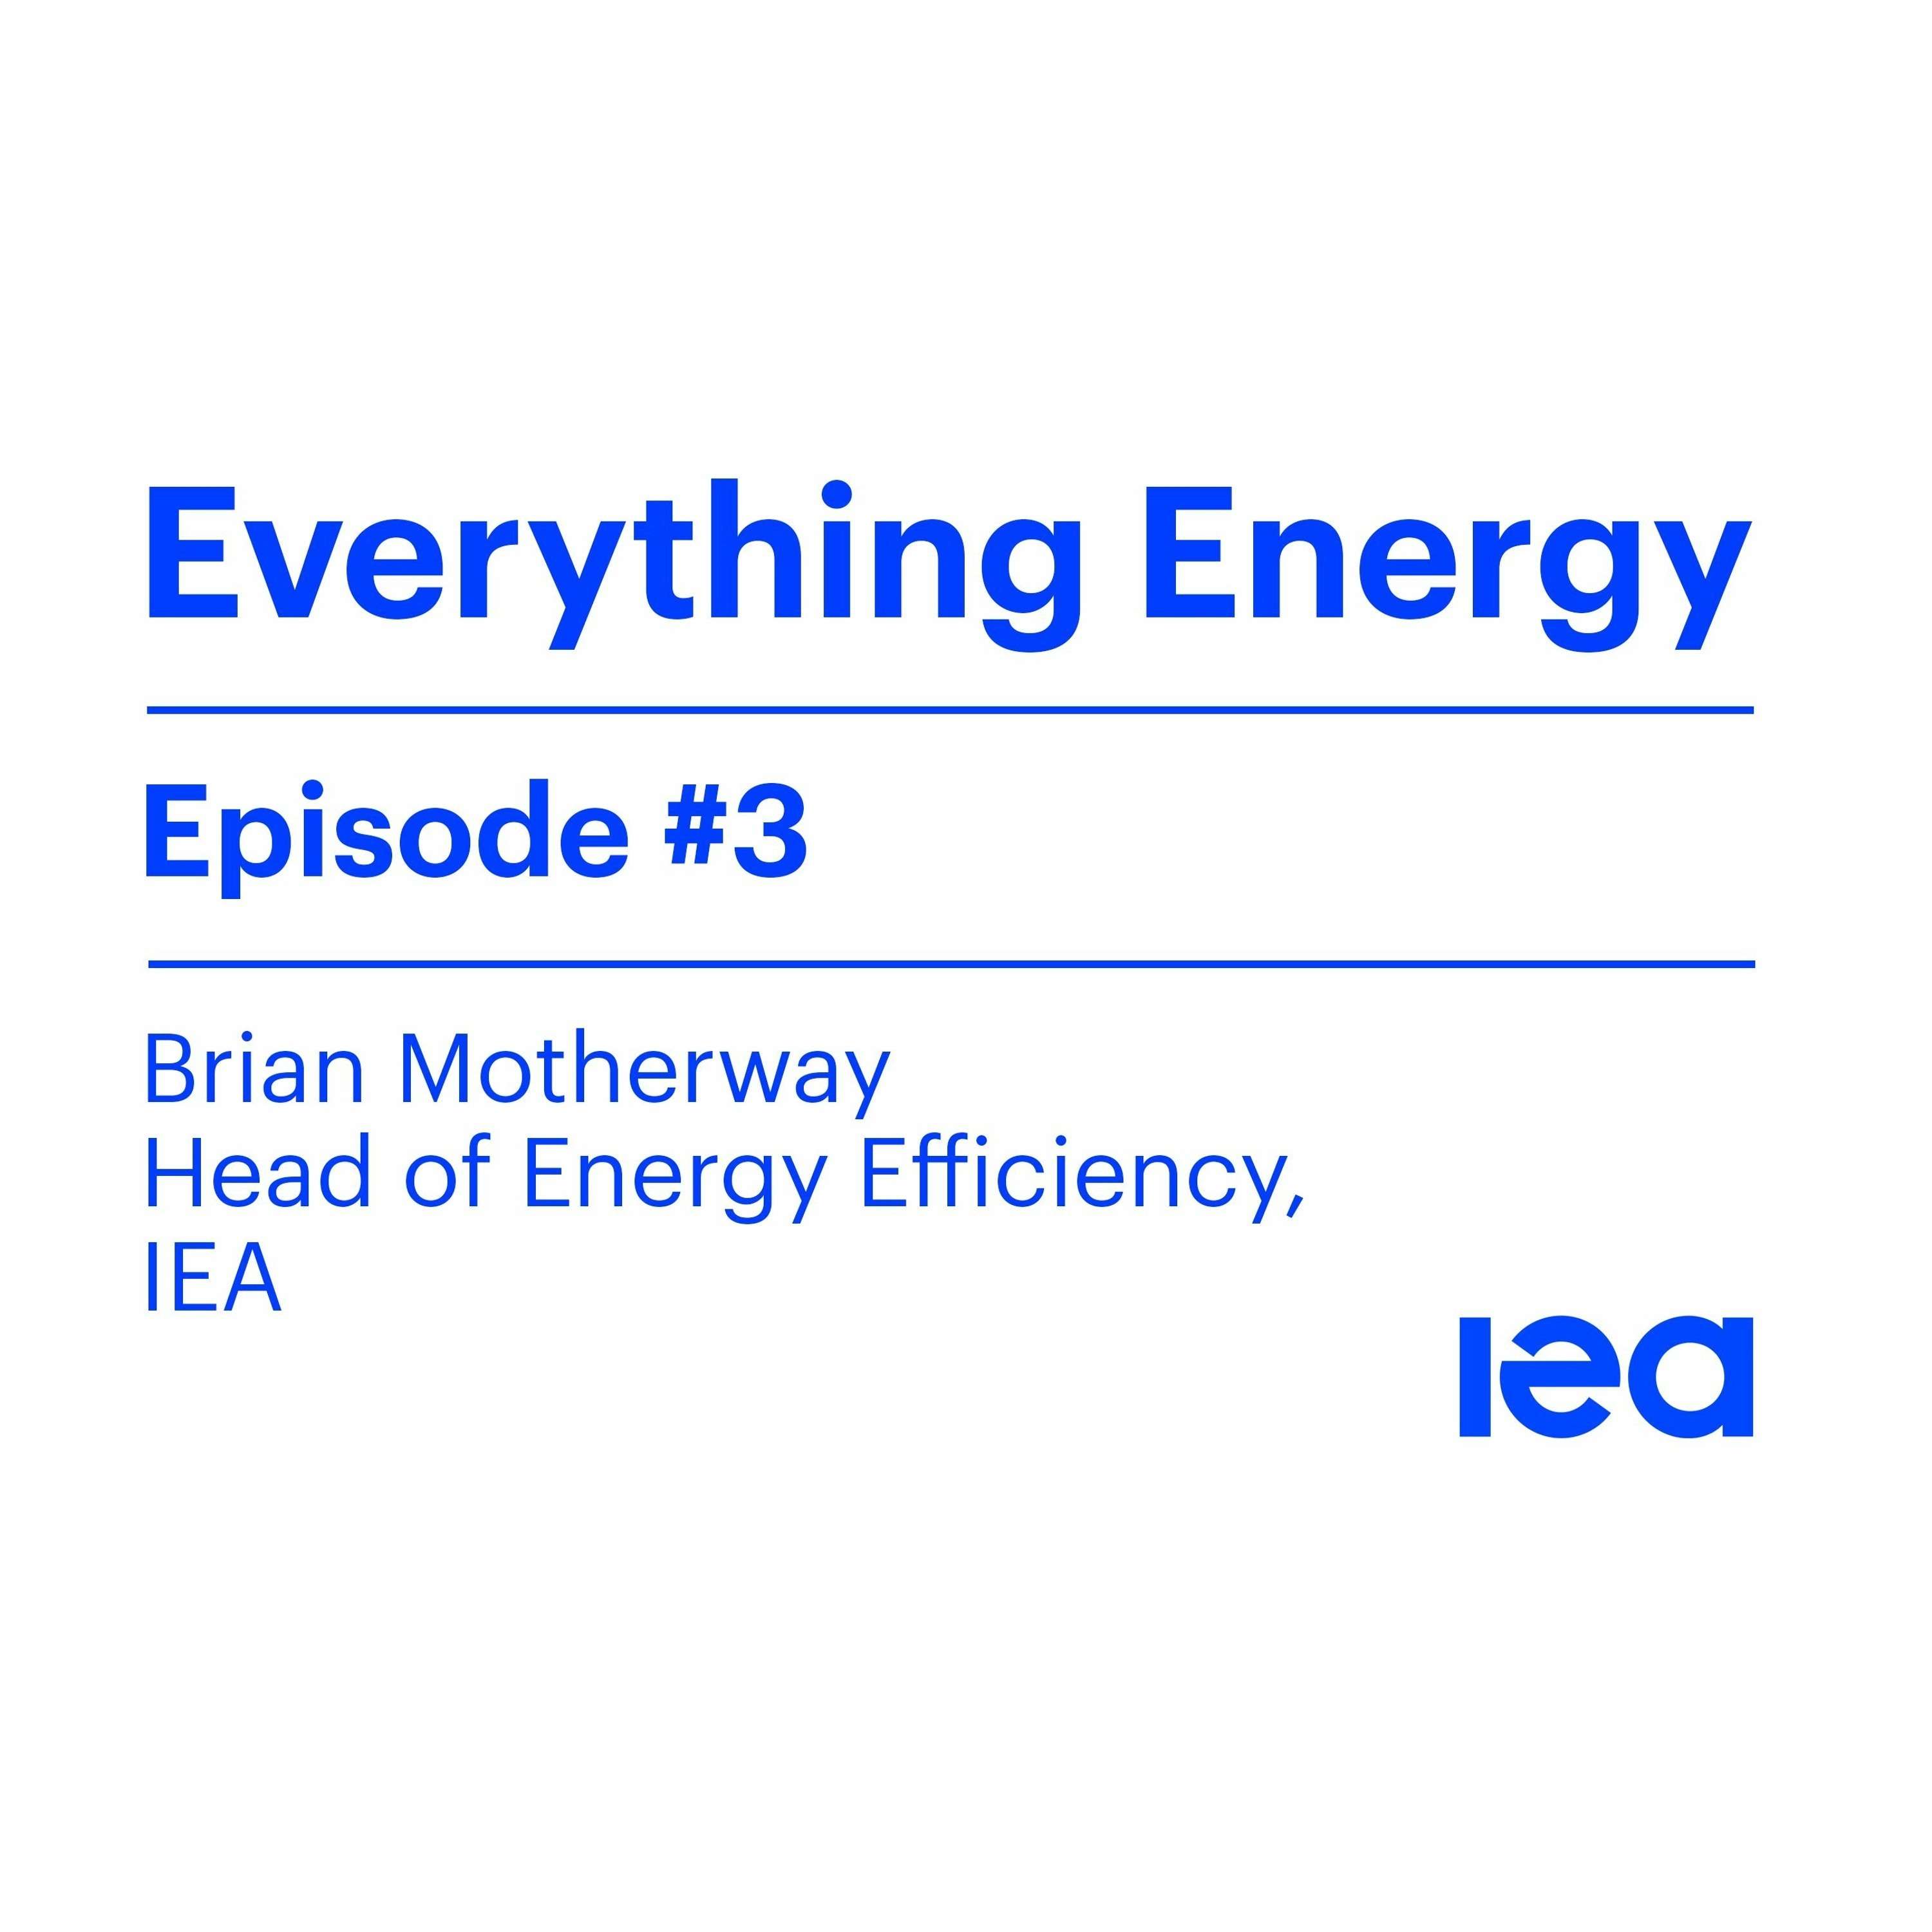 Episode 3: Energy efficiency - the first fuel